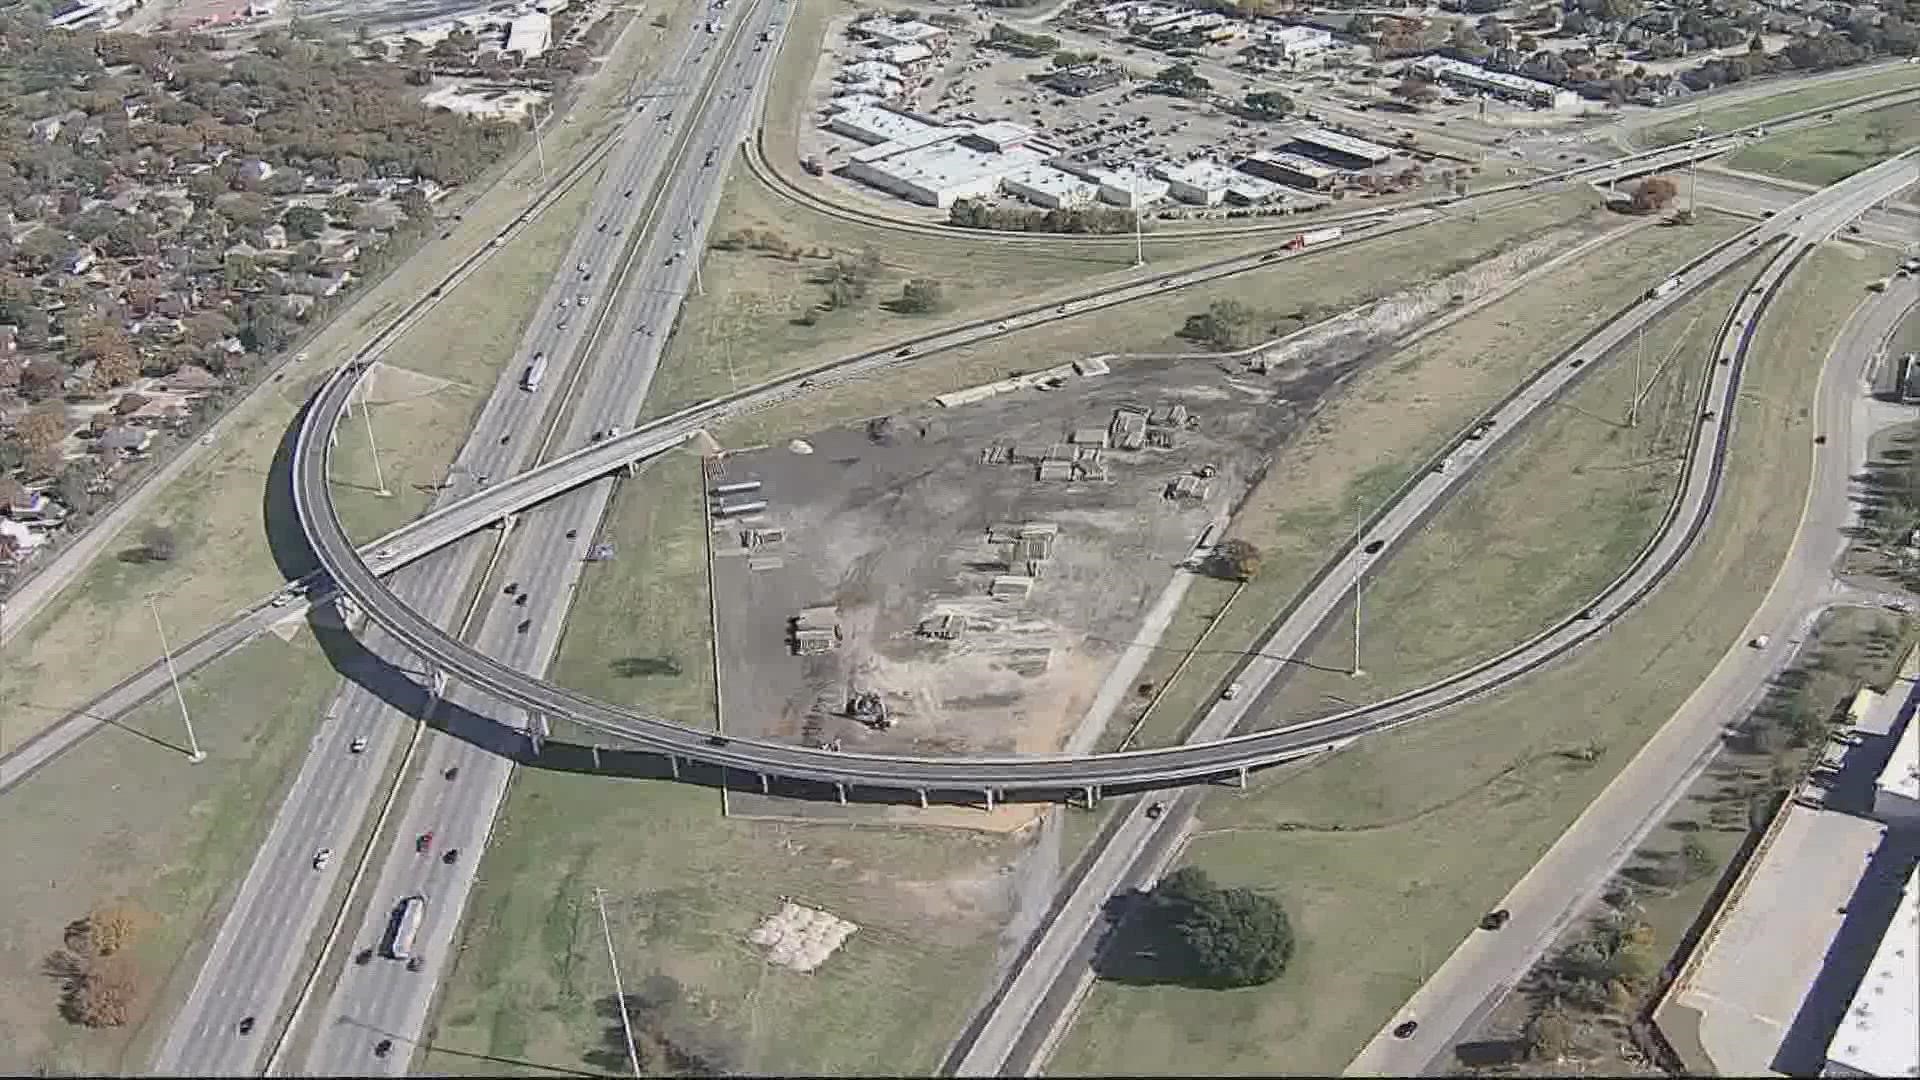 The project will widen Interstate 20 in southeast Fort Worth to 10 main lanes and I-820 to 8 main lanes.